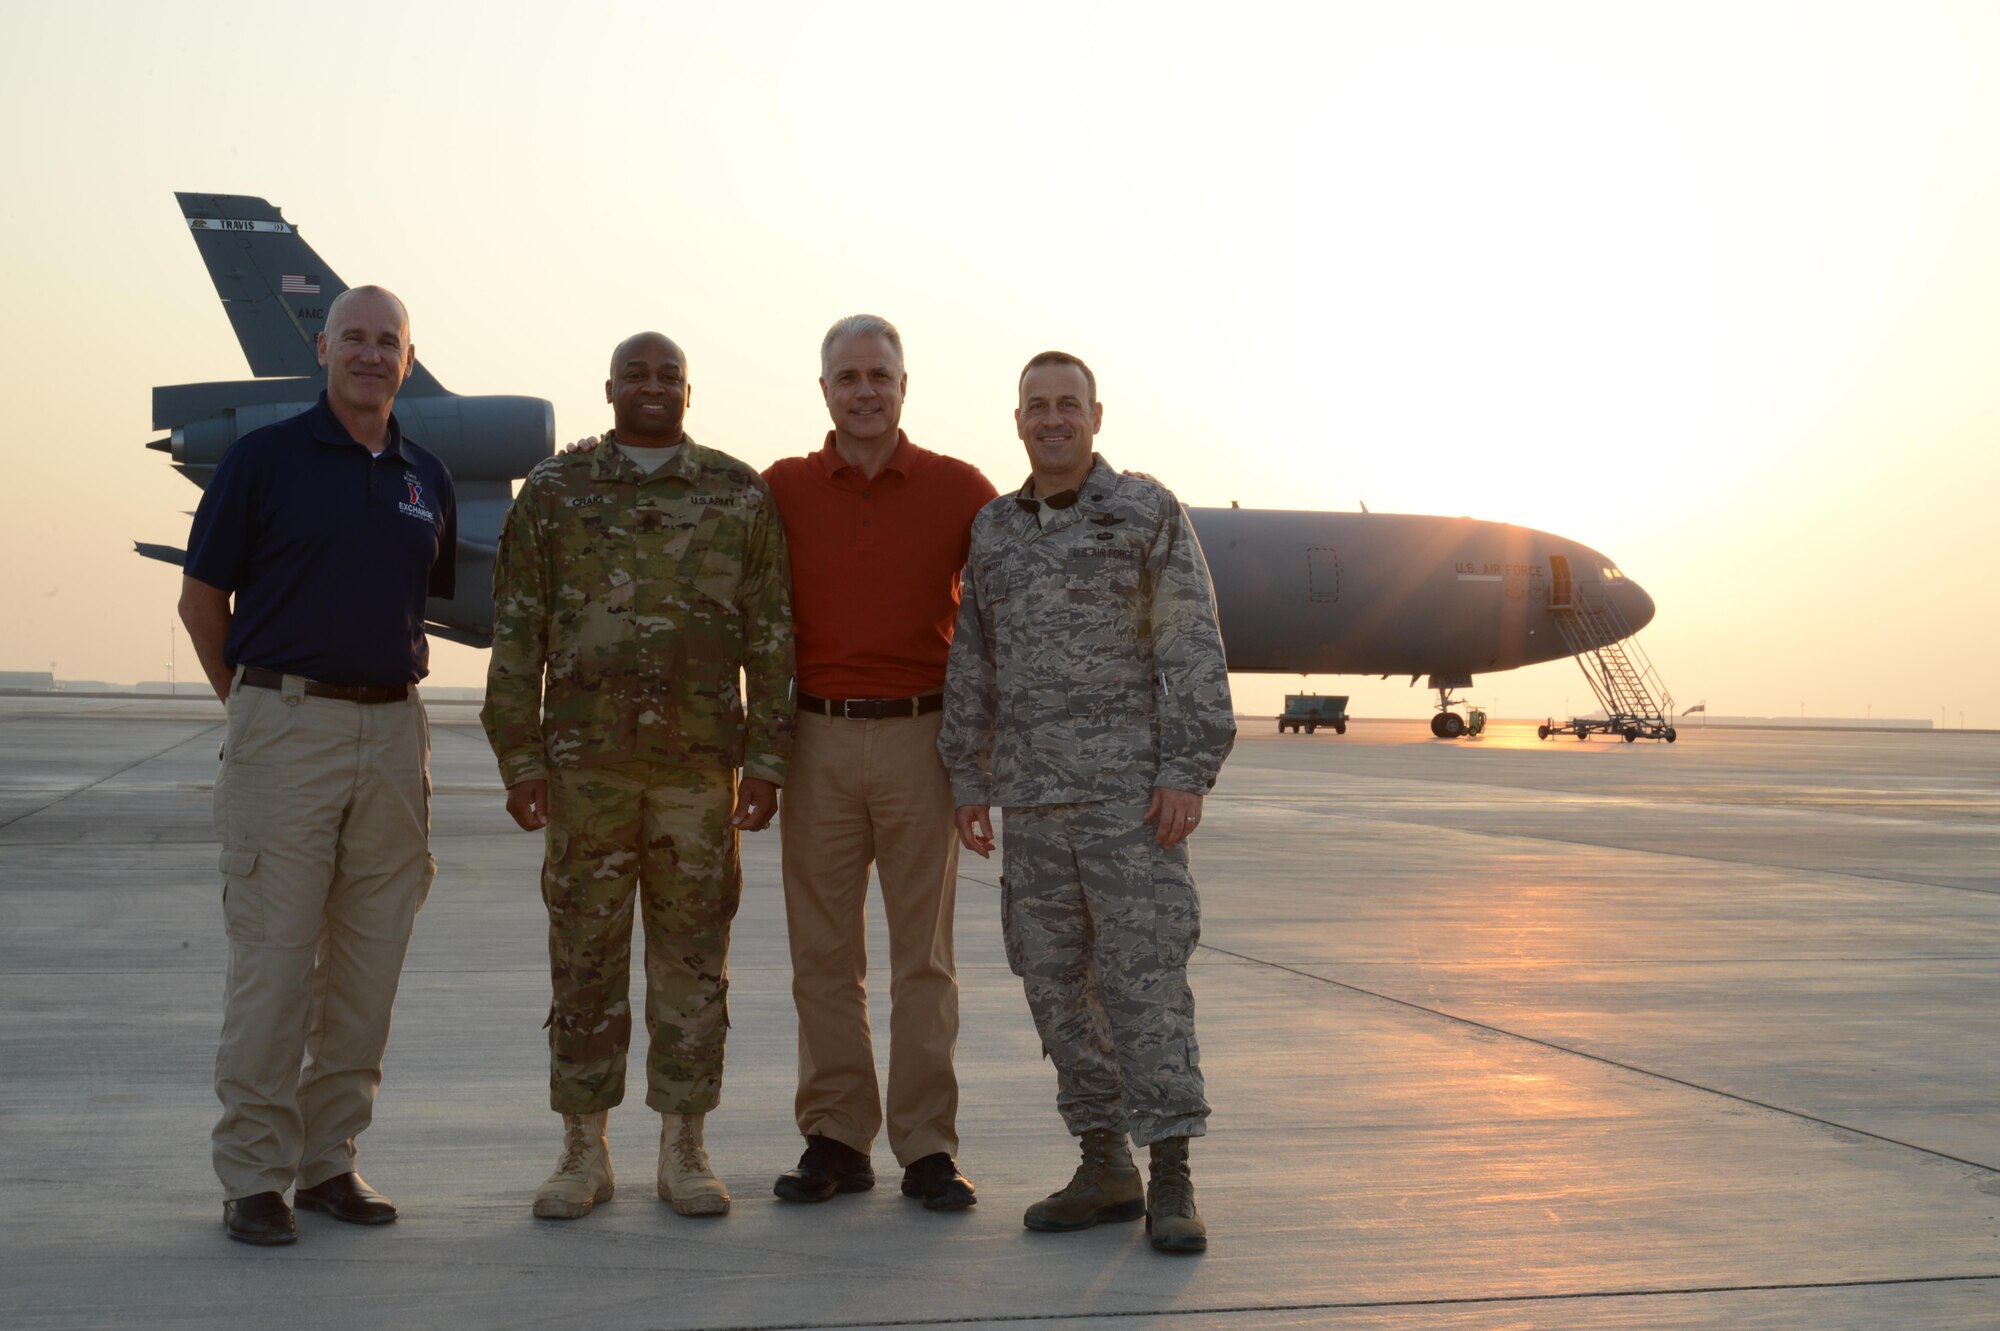 Ken Caldwell, senior vice president and general sales manager for theatrical sales and distribution, North America, Walt Disney Studios Motion Pictures, poses for a photo in front of a KC-10 Extender with Army and Air Force Exchange Service and 380th Air Expeditionary Wing representatives at an undisclosed location, Dec. 21, 2015. Disney and AAFES coordinated their efforts to ensure deployed service members were able to see the movie before returning home. (U. S. Air Force photo by Tech. Sgt. Frank Miller/Released)